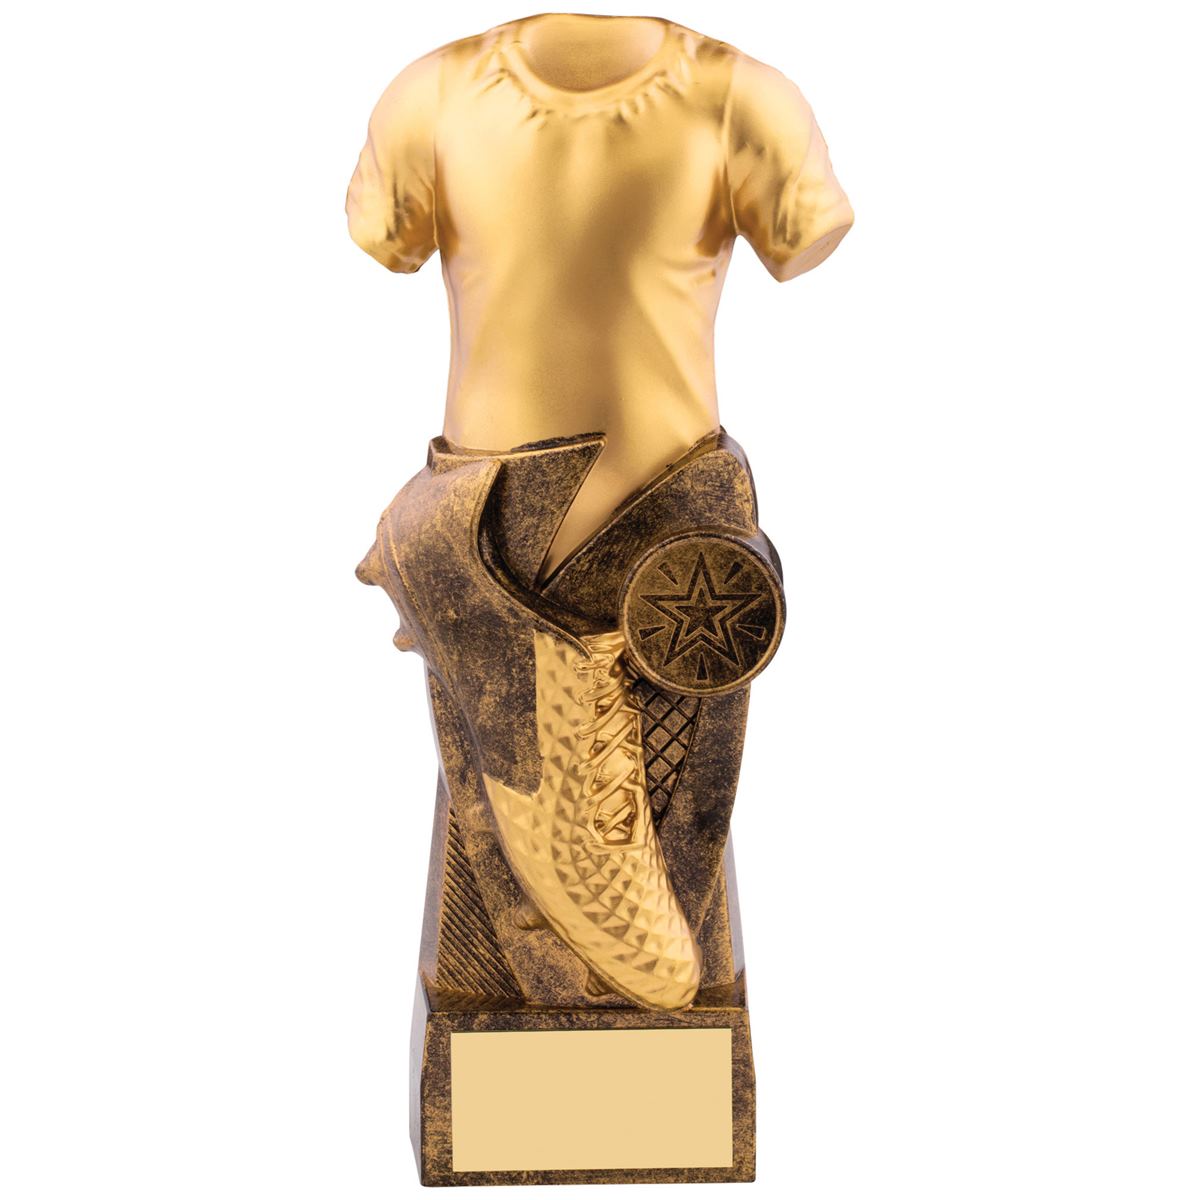 Football Trophy Tempo Shirt & Boot Design in Gold